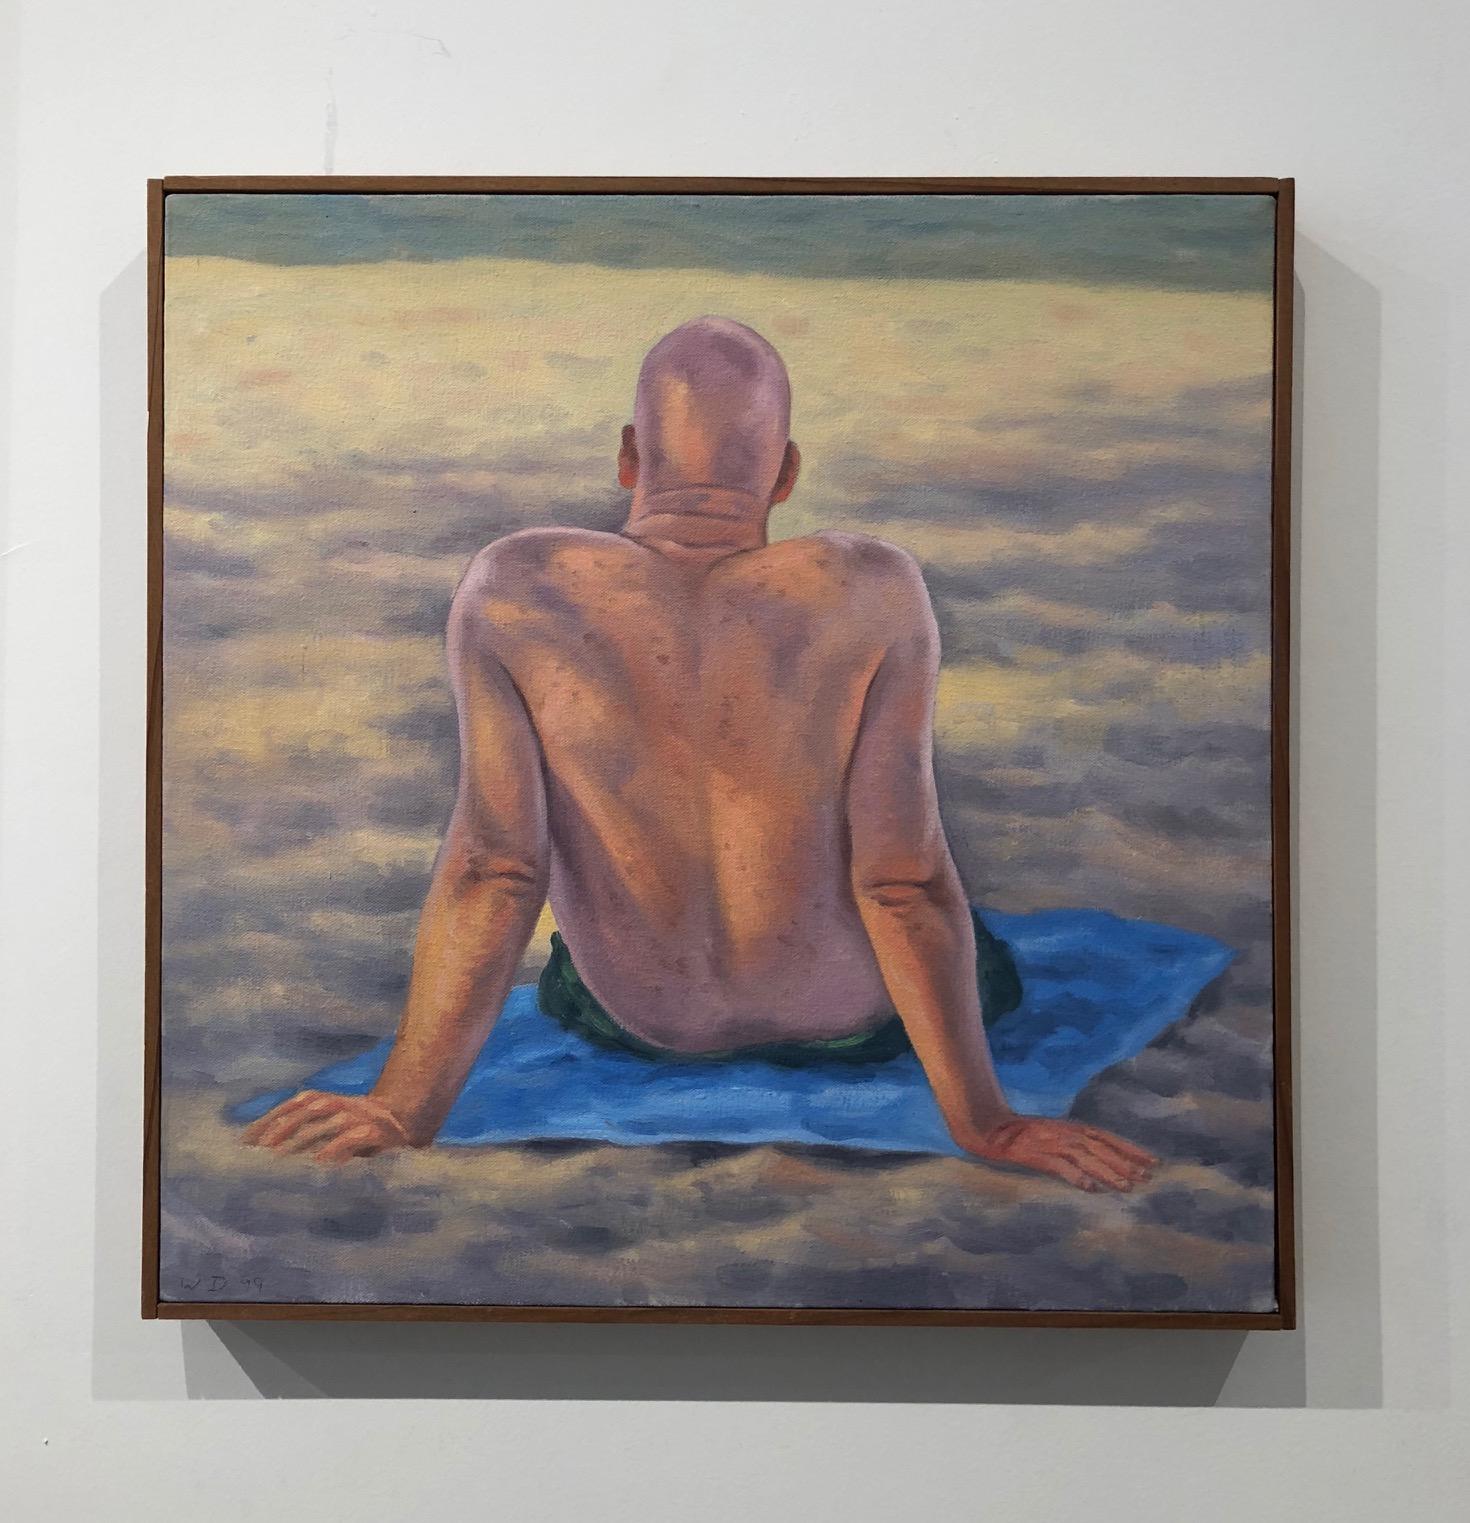 Bald Headed Man - oil on canvas - Contemporary Painting by Willard Dixon